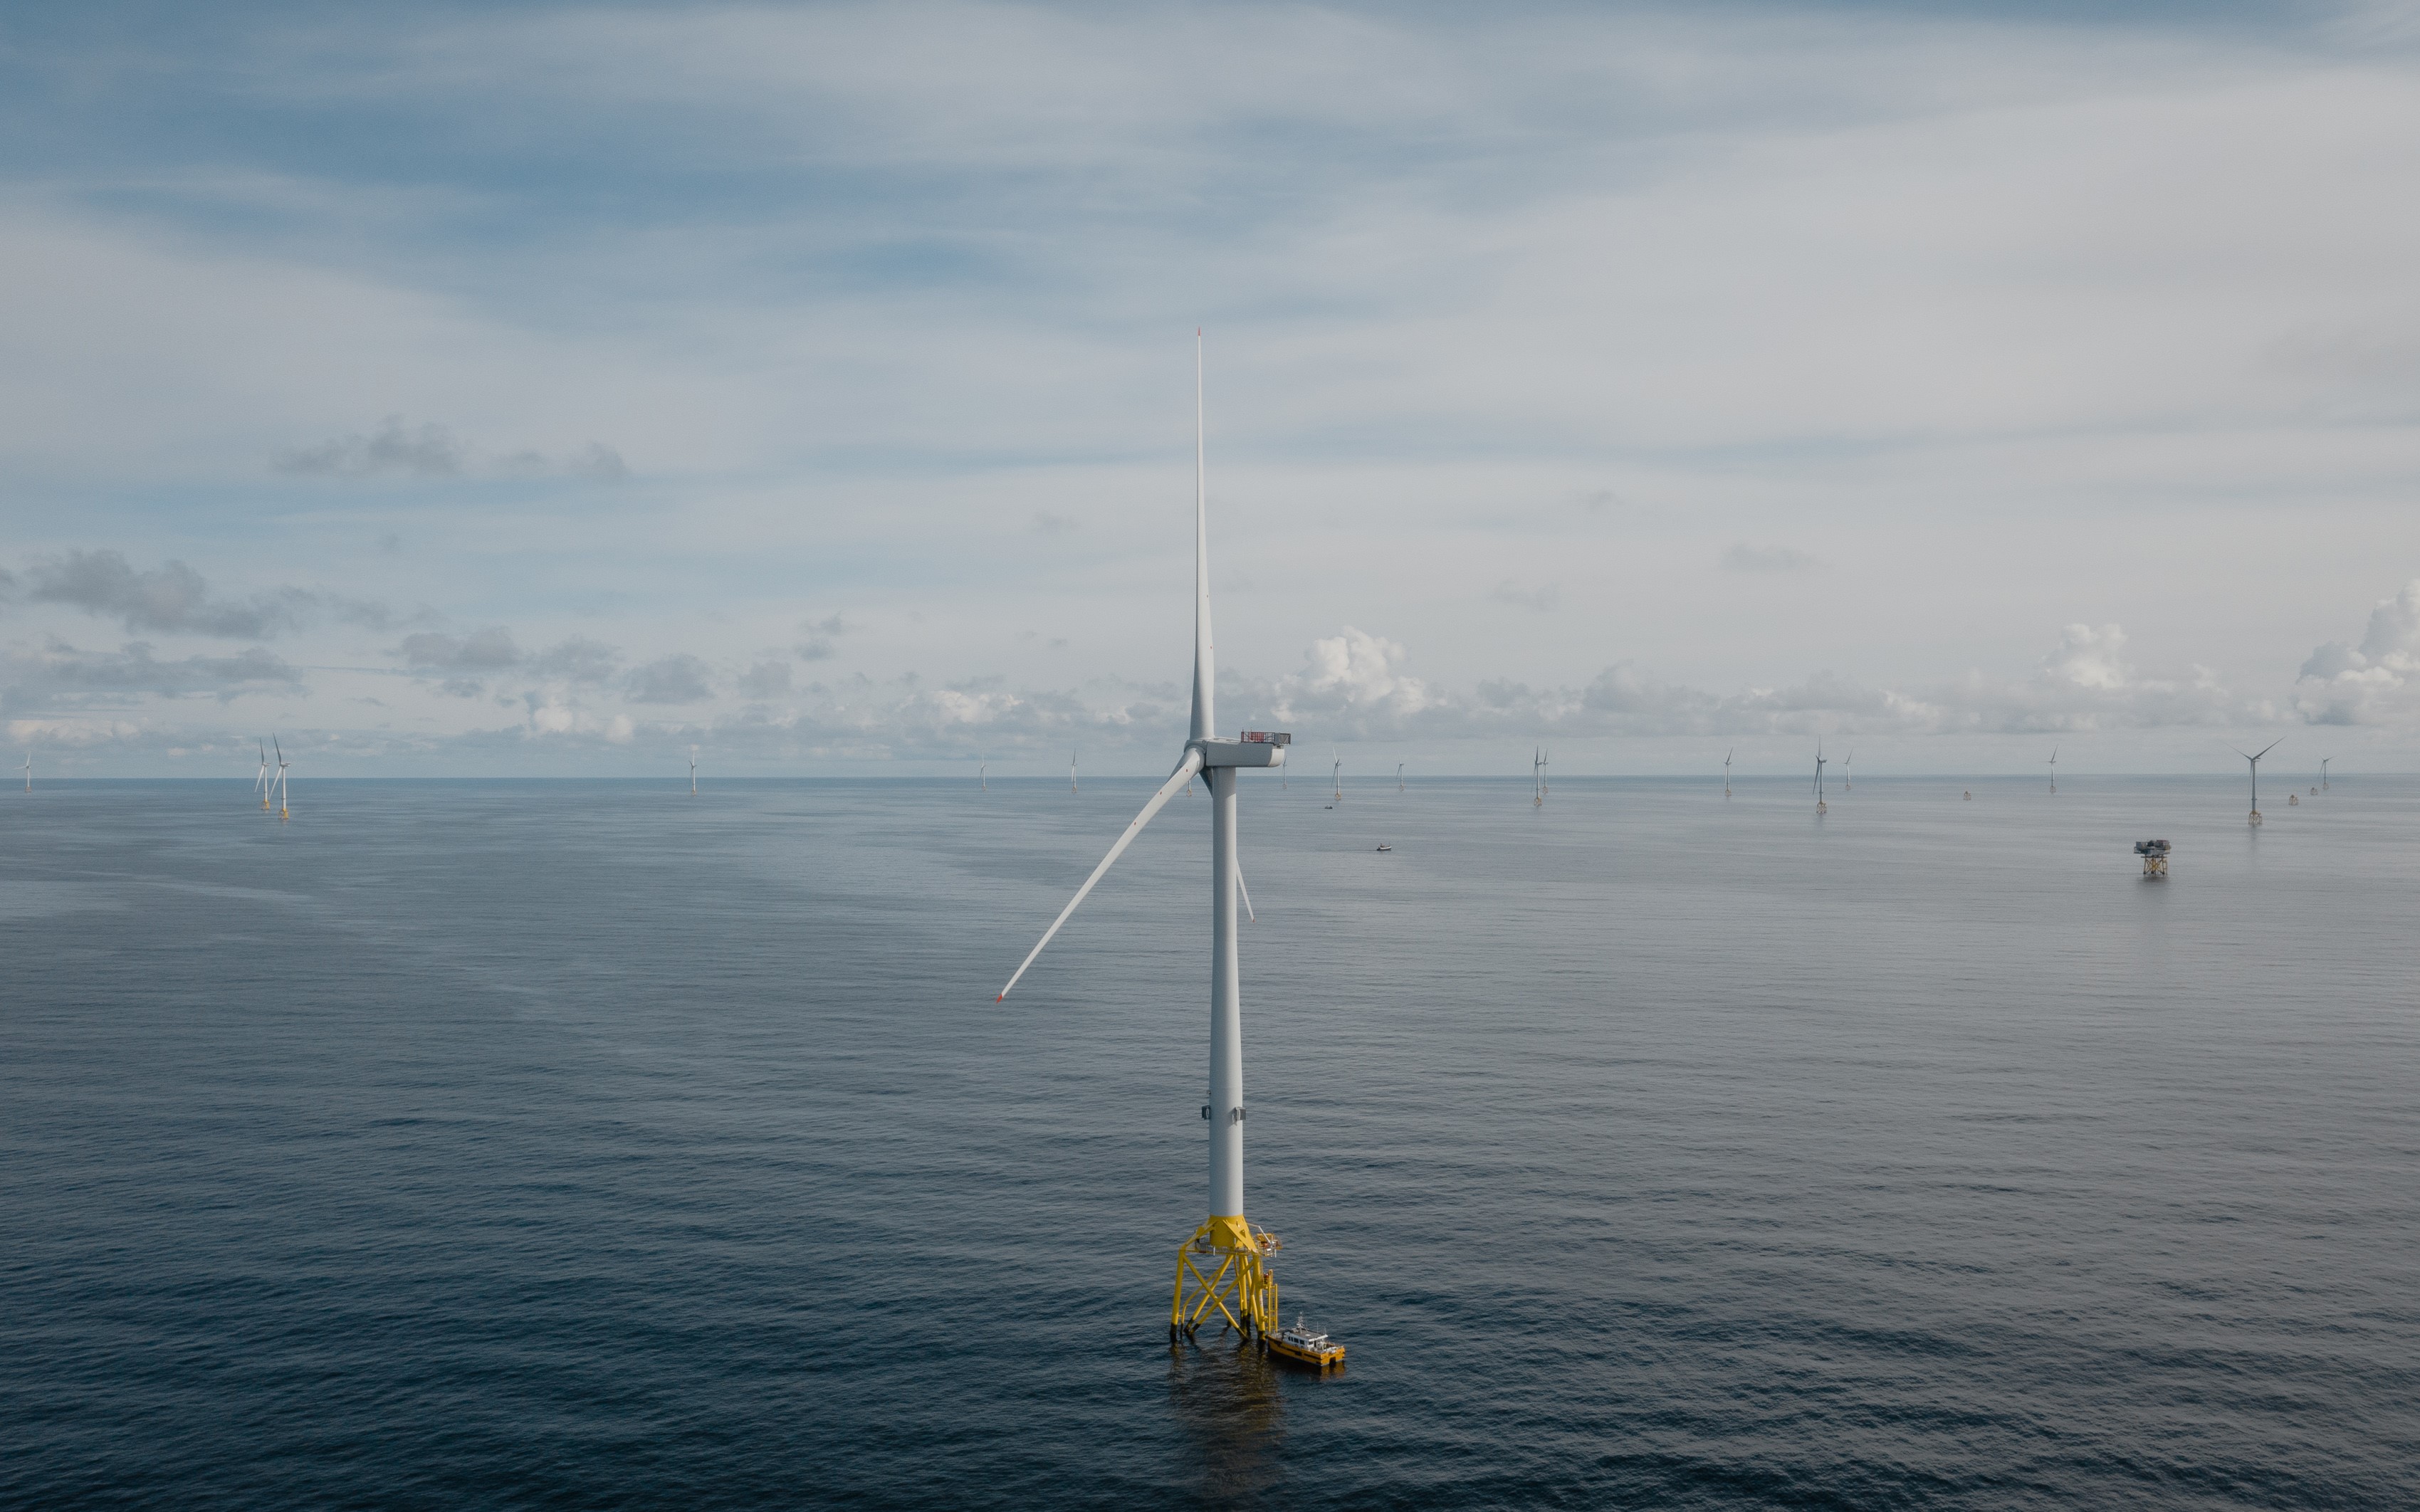 A photo of Ocean Winds' Moray East offshore wind farm in Scotland